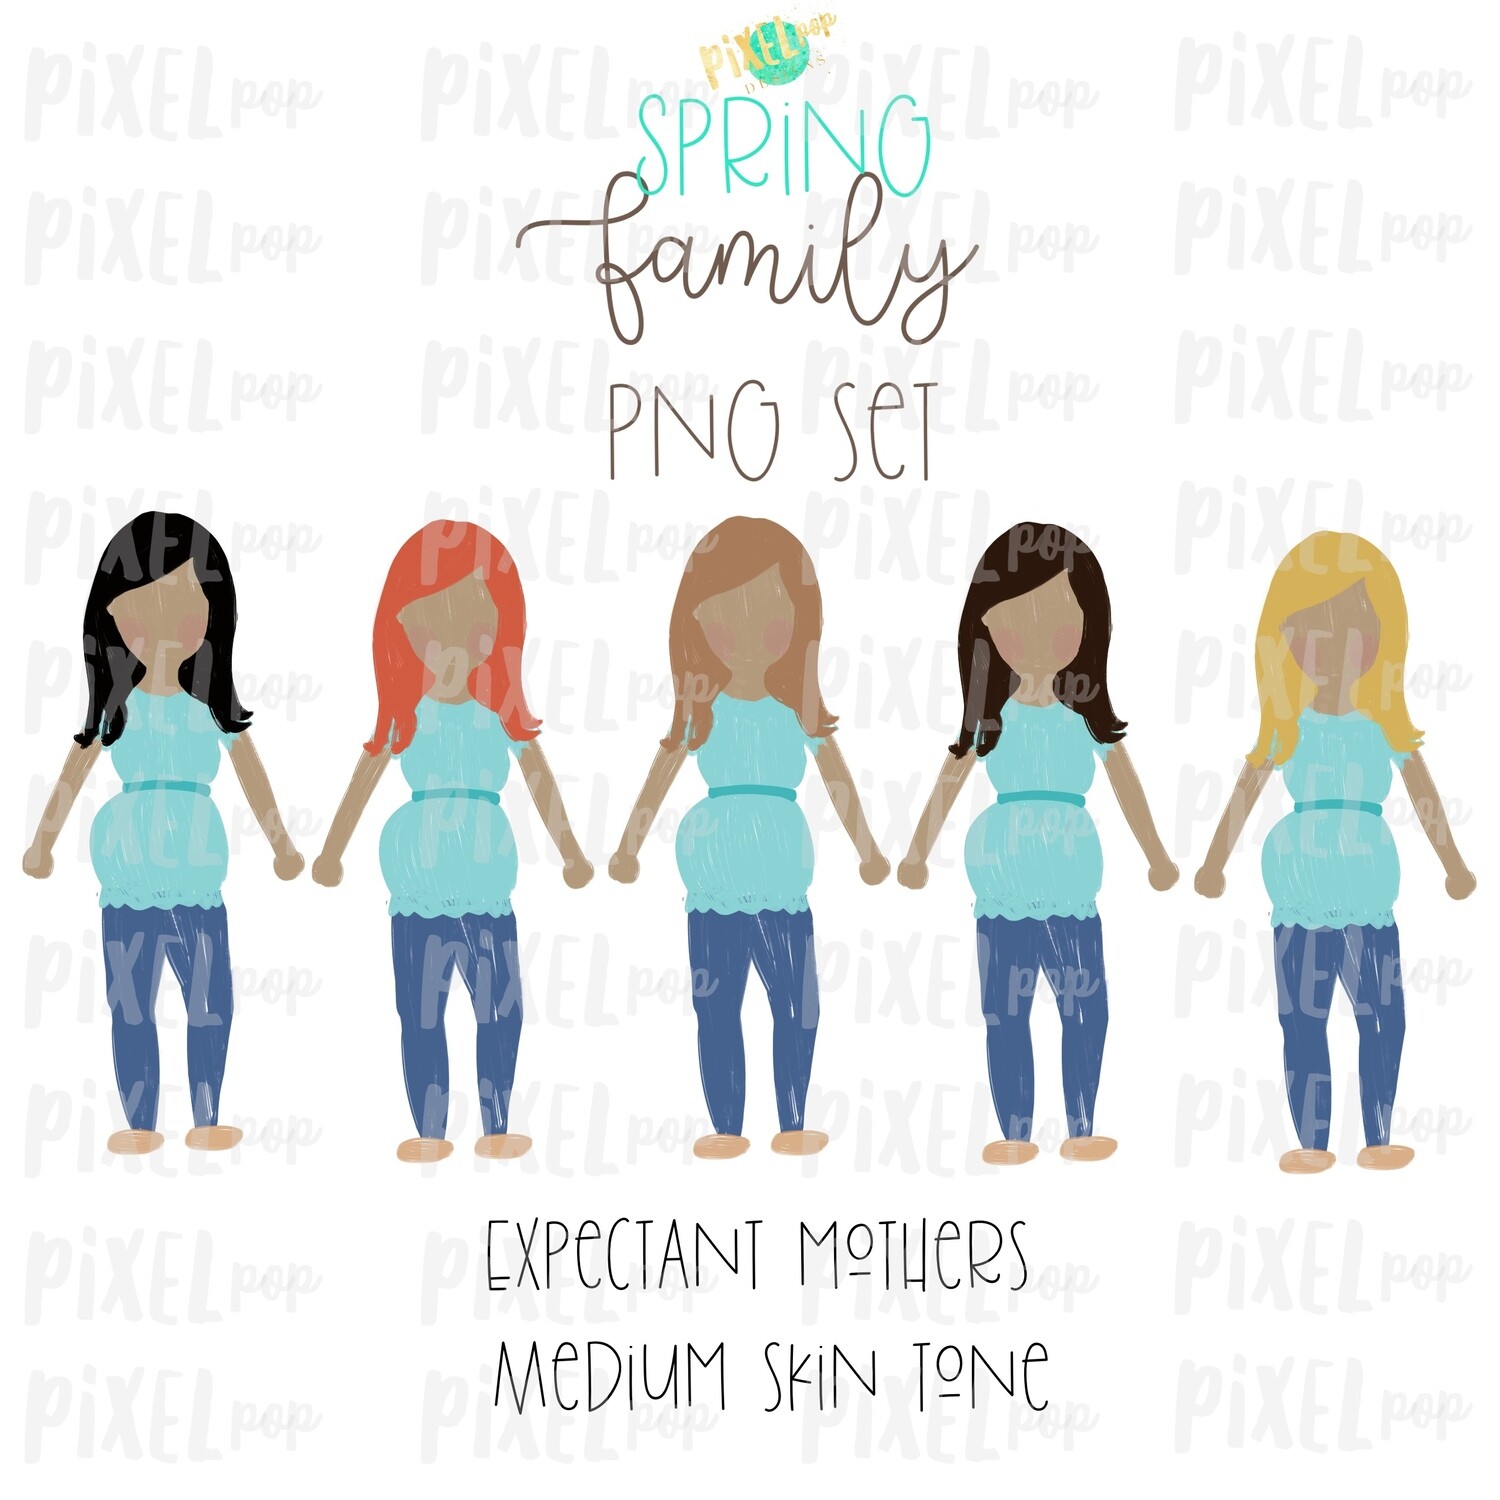 Expectant Pregnant Mothers SPRING Medium Skin Tone Stick People Figure Members PNG | Family Ornament | Family Portrait Images | Digital Art